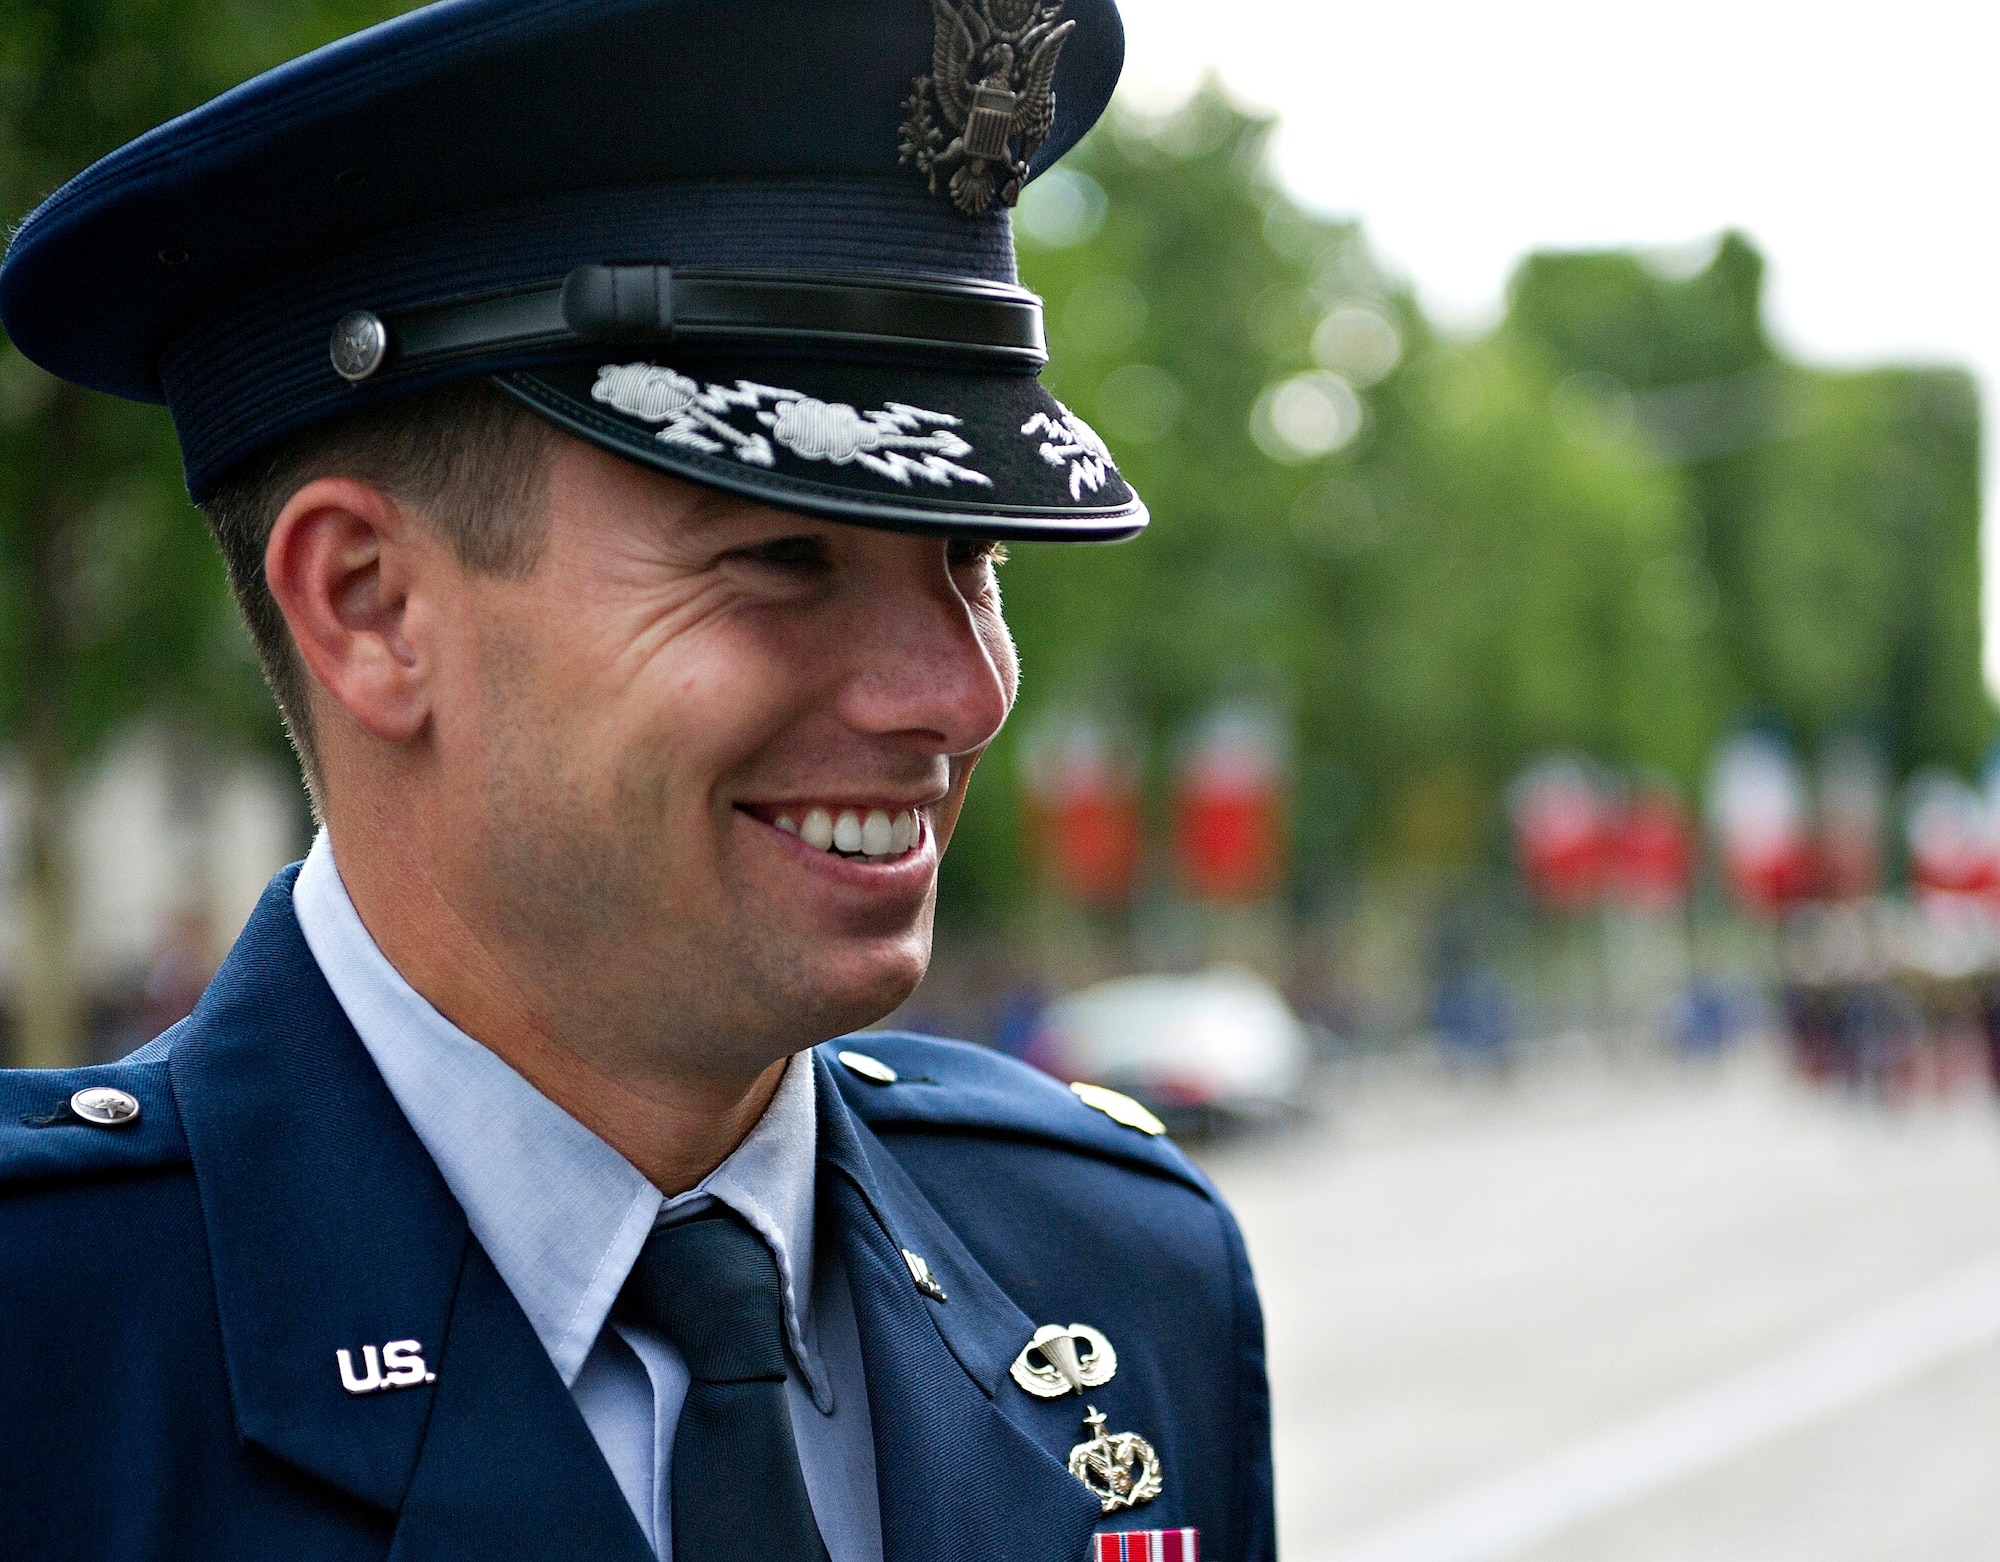 PARIS -- U.S. Air Force Maj. James Gingras, French Air Force Academy exchange officer, left, speaks with his cadets before marching in the 2012, 14th of July parade in Paris. The 14th of July, known in English by Bastille Day, is the French equivalent of the American 4th of July. It commemorates the attack on the Bastille on July 14, 1989, which preceded the French revolution. (U.S. Air Force photo/Staff Sgt. Benjamin Wilson)